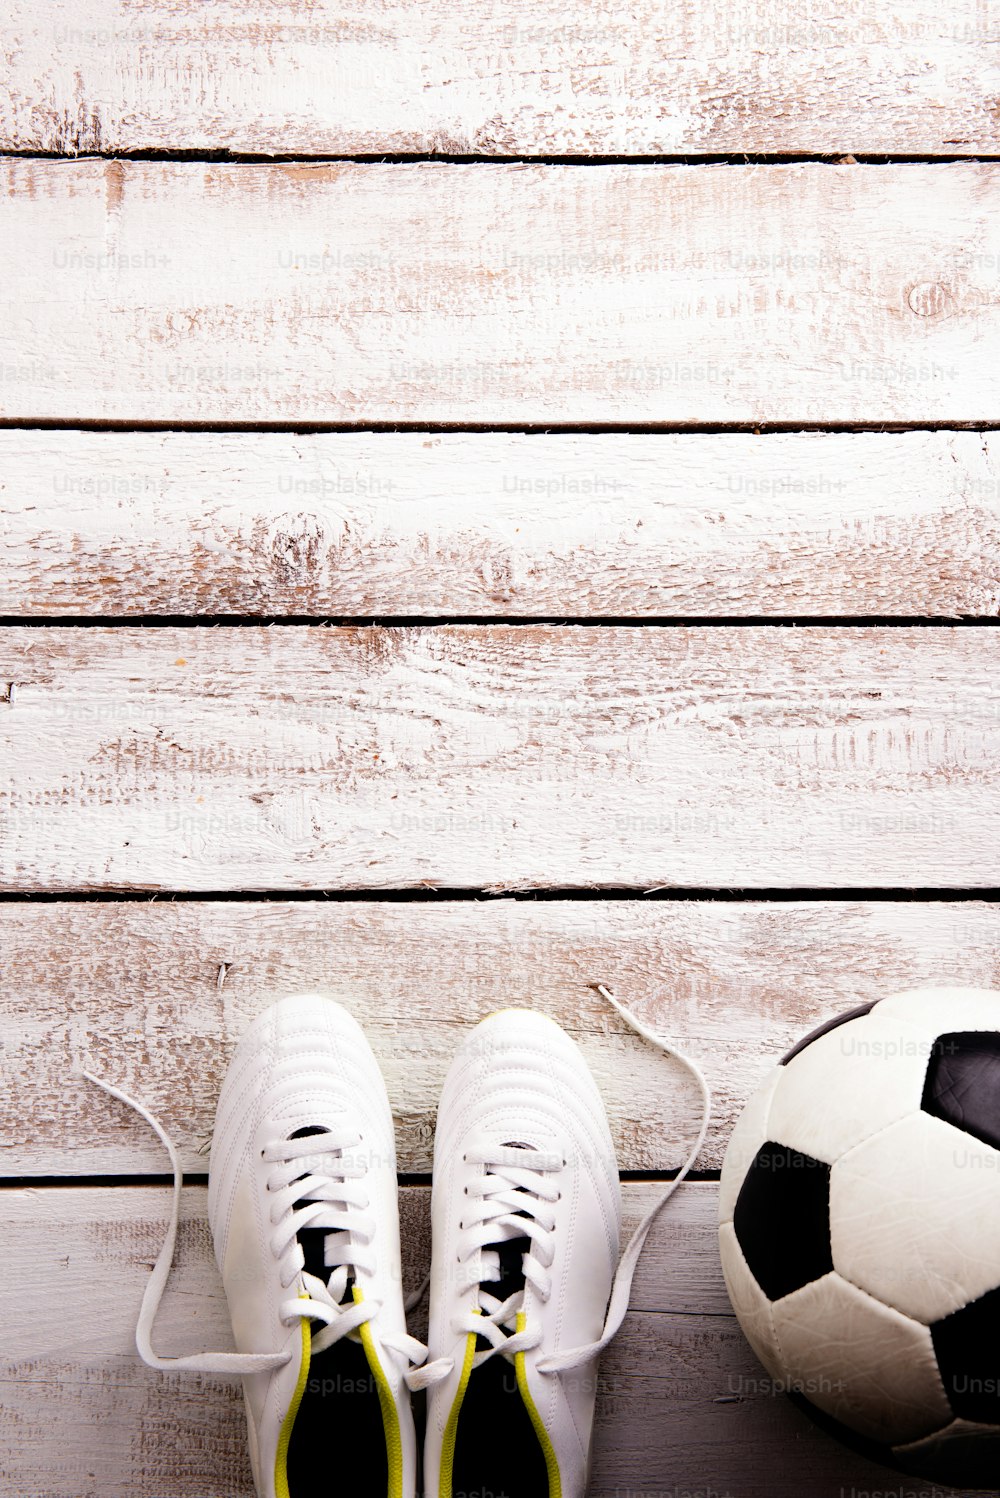 Soccer ball, cleats against wooden floor, studio shot on white background. Flat lay, copy space